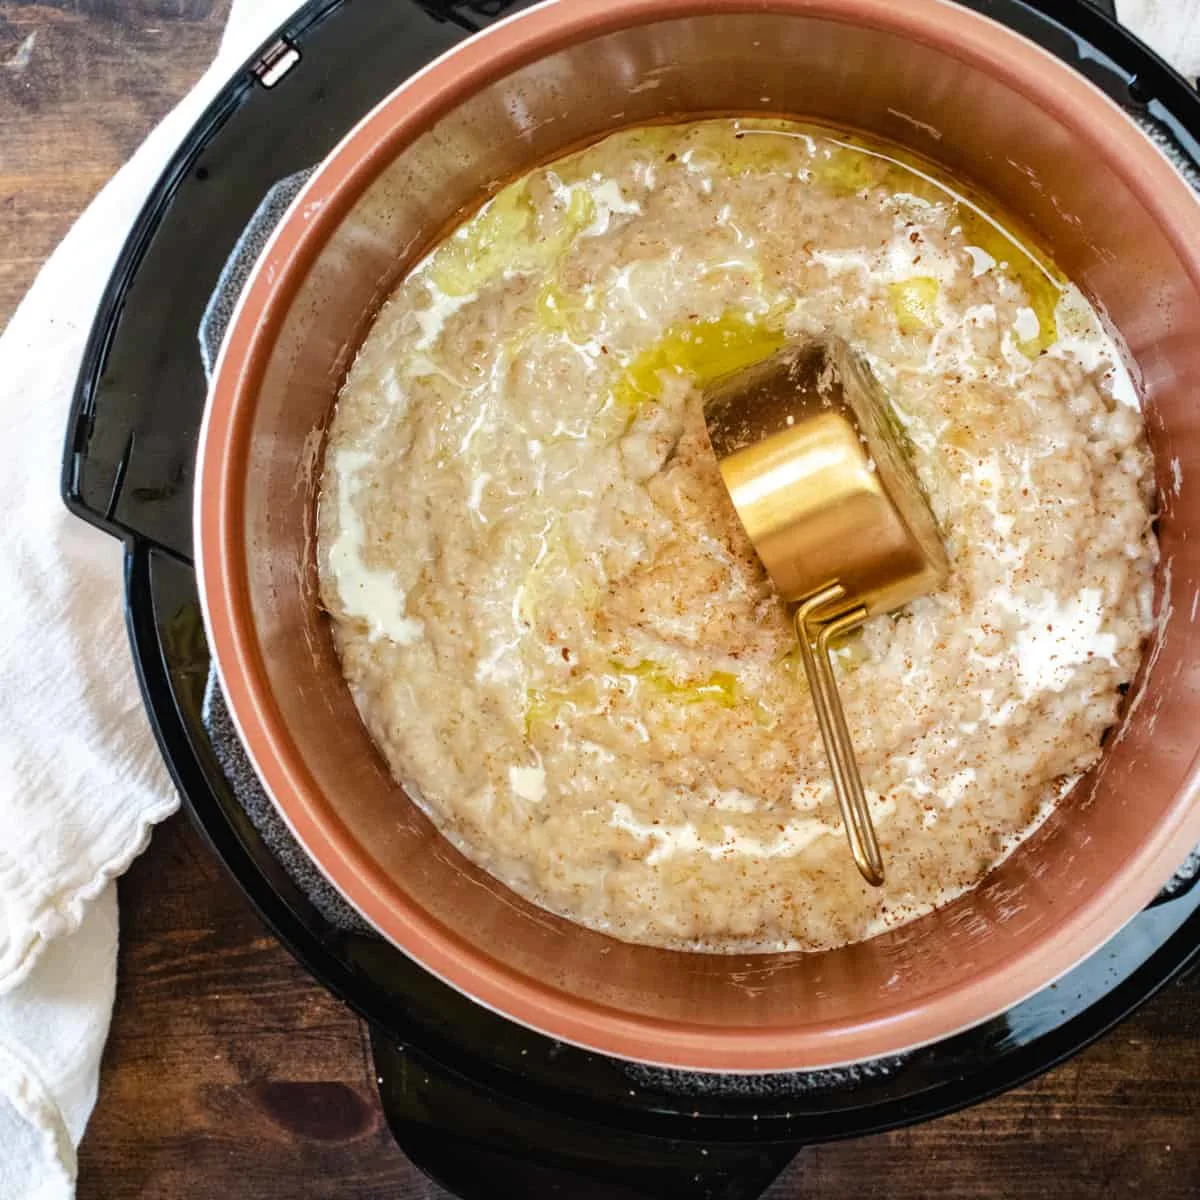 Pressure cooked rolled oats in an Instant Pot.